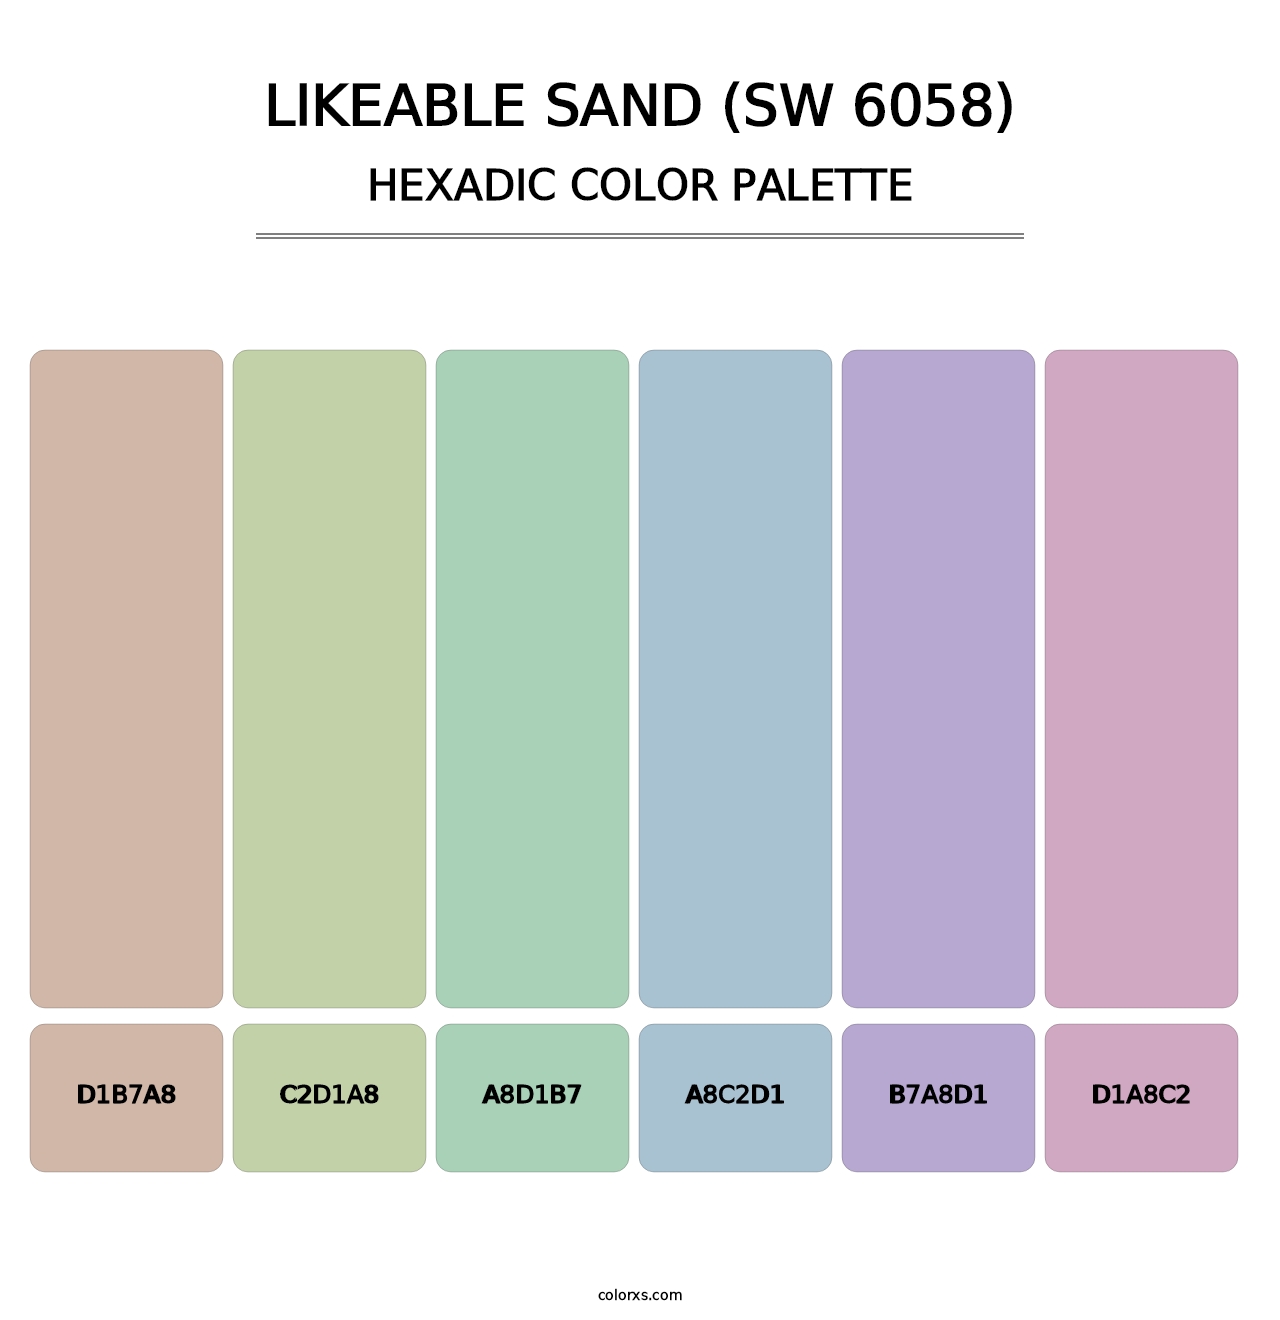 Likeable Sand (SW 6058) - Hexadic Color Palette